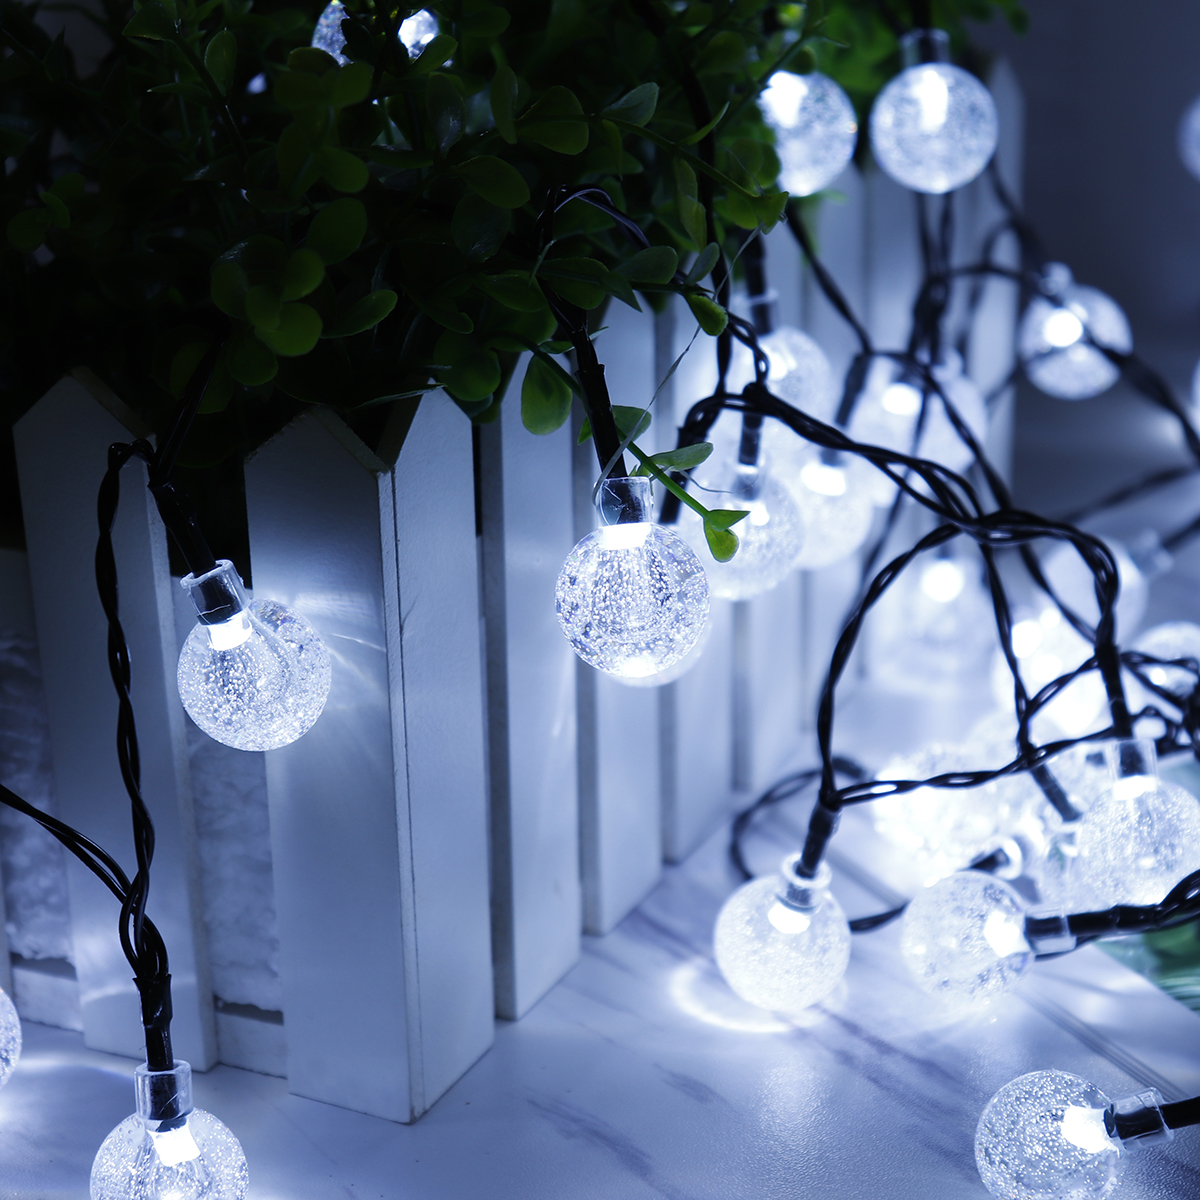 Outdoor-95M-50LEDs-String-Ball-Light-Remote-Control-8-Modes-Waterproof-Garden-Party-Wedding-Christma-1747631-9